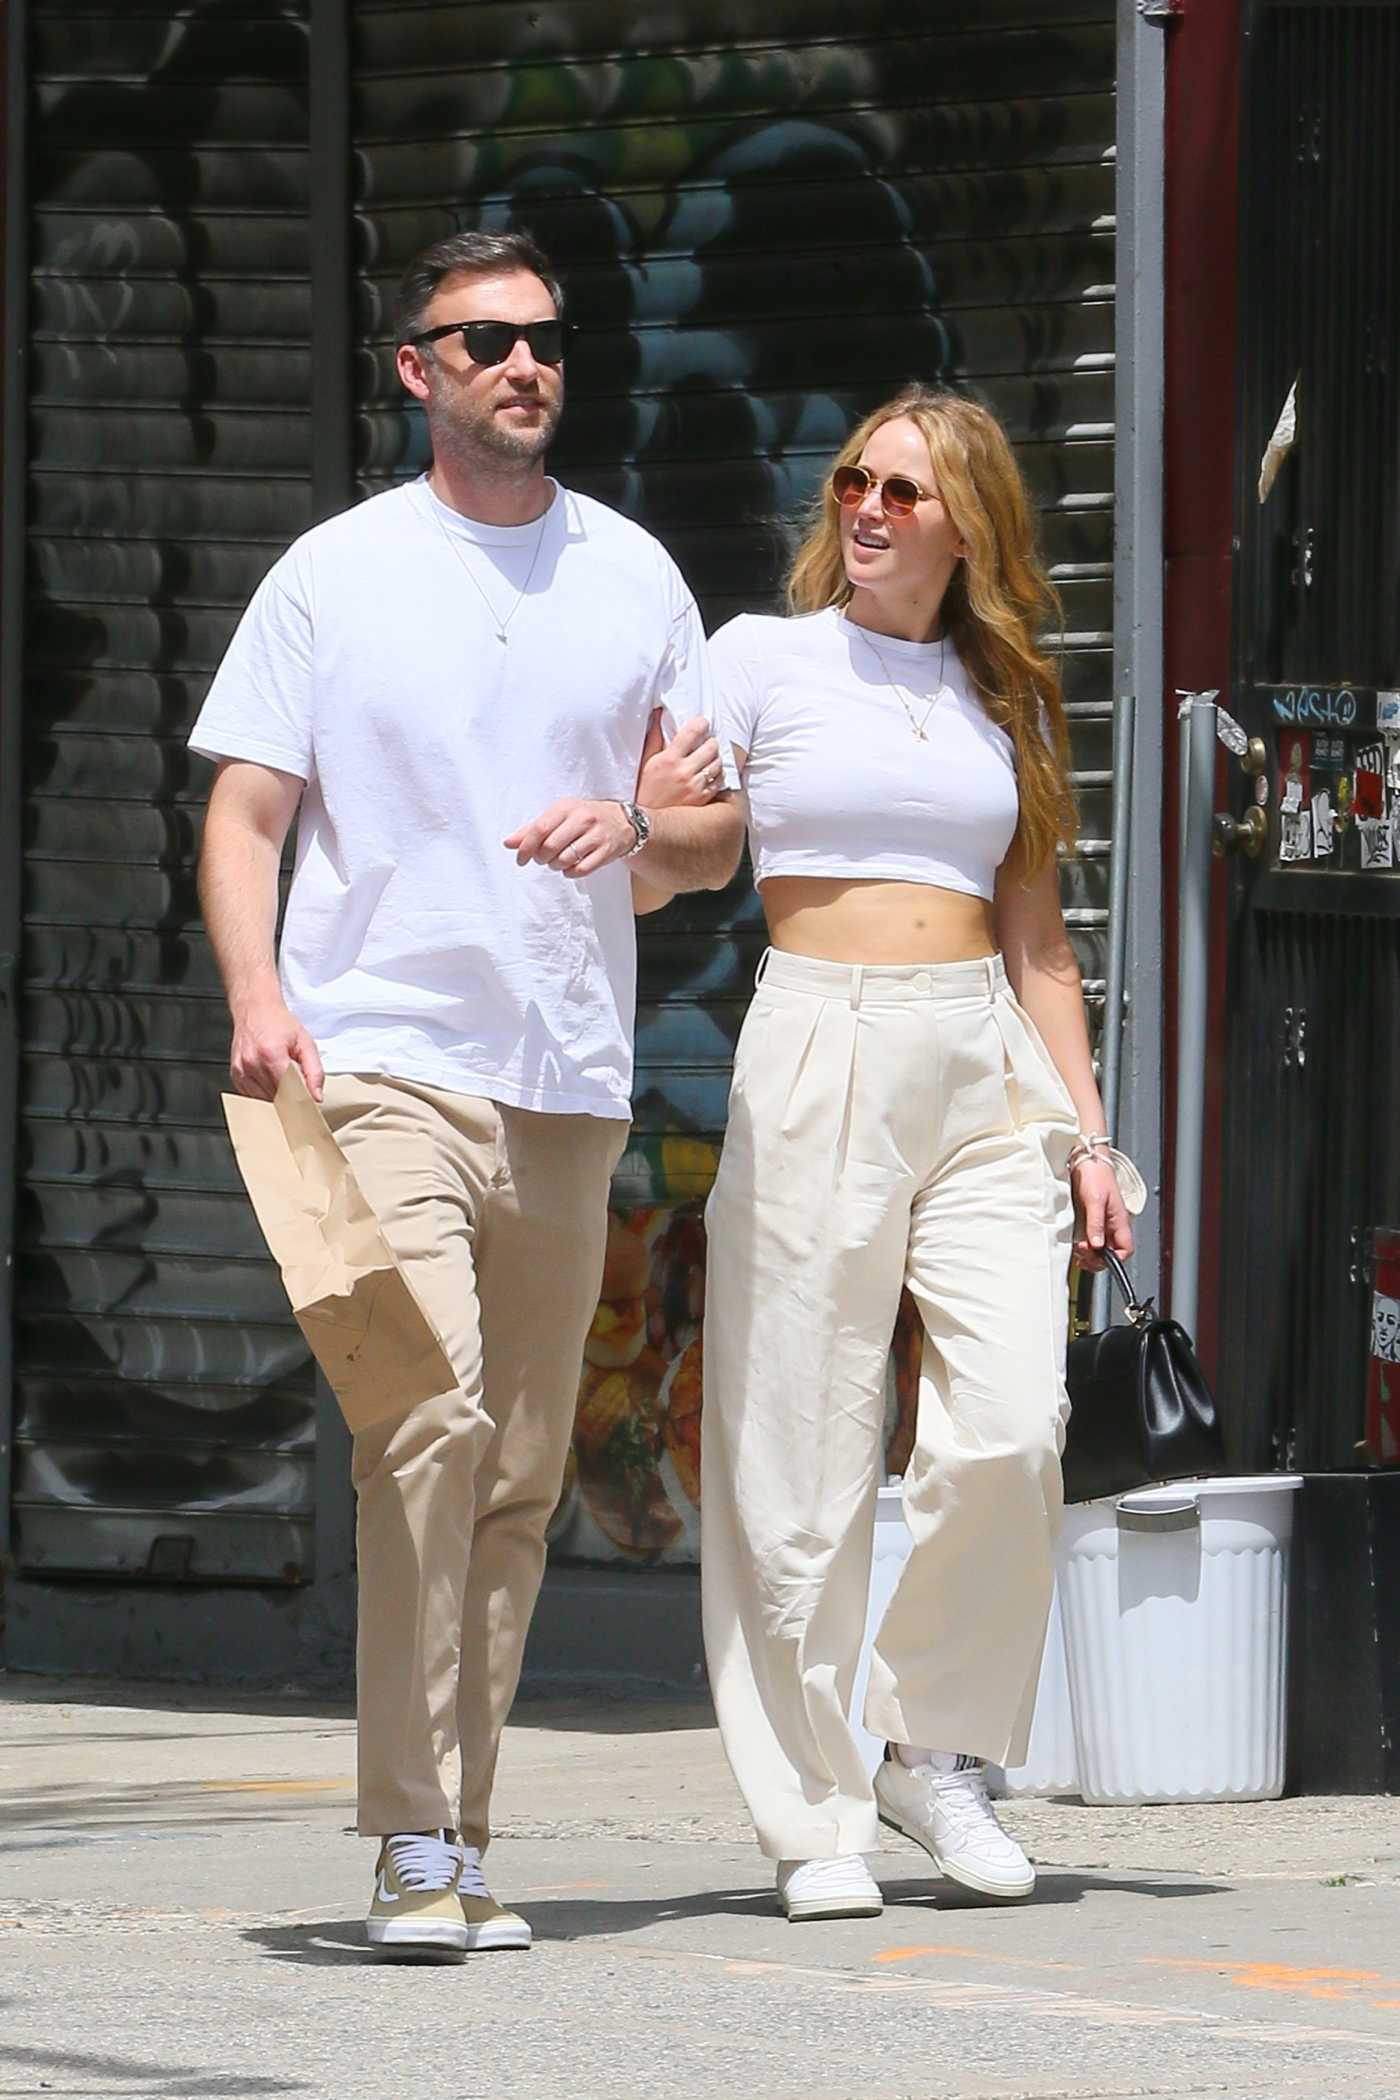 Jennifer Lawrence in a White Top Was Seen Out with Cooke Maroney in New York 05/22/2021